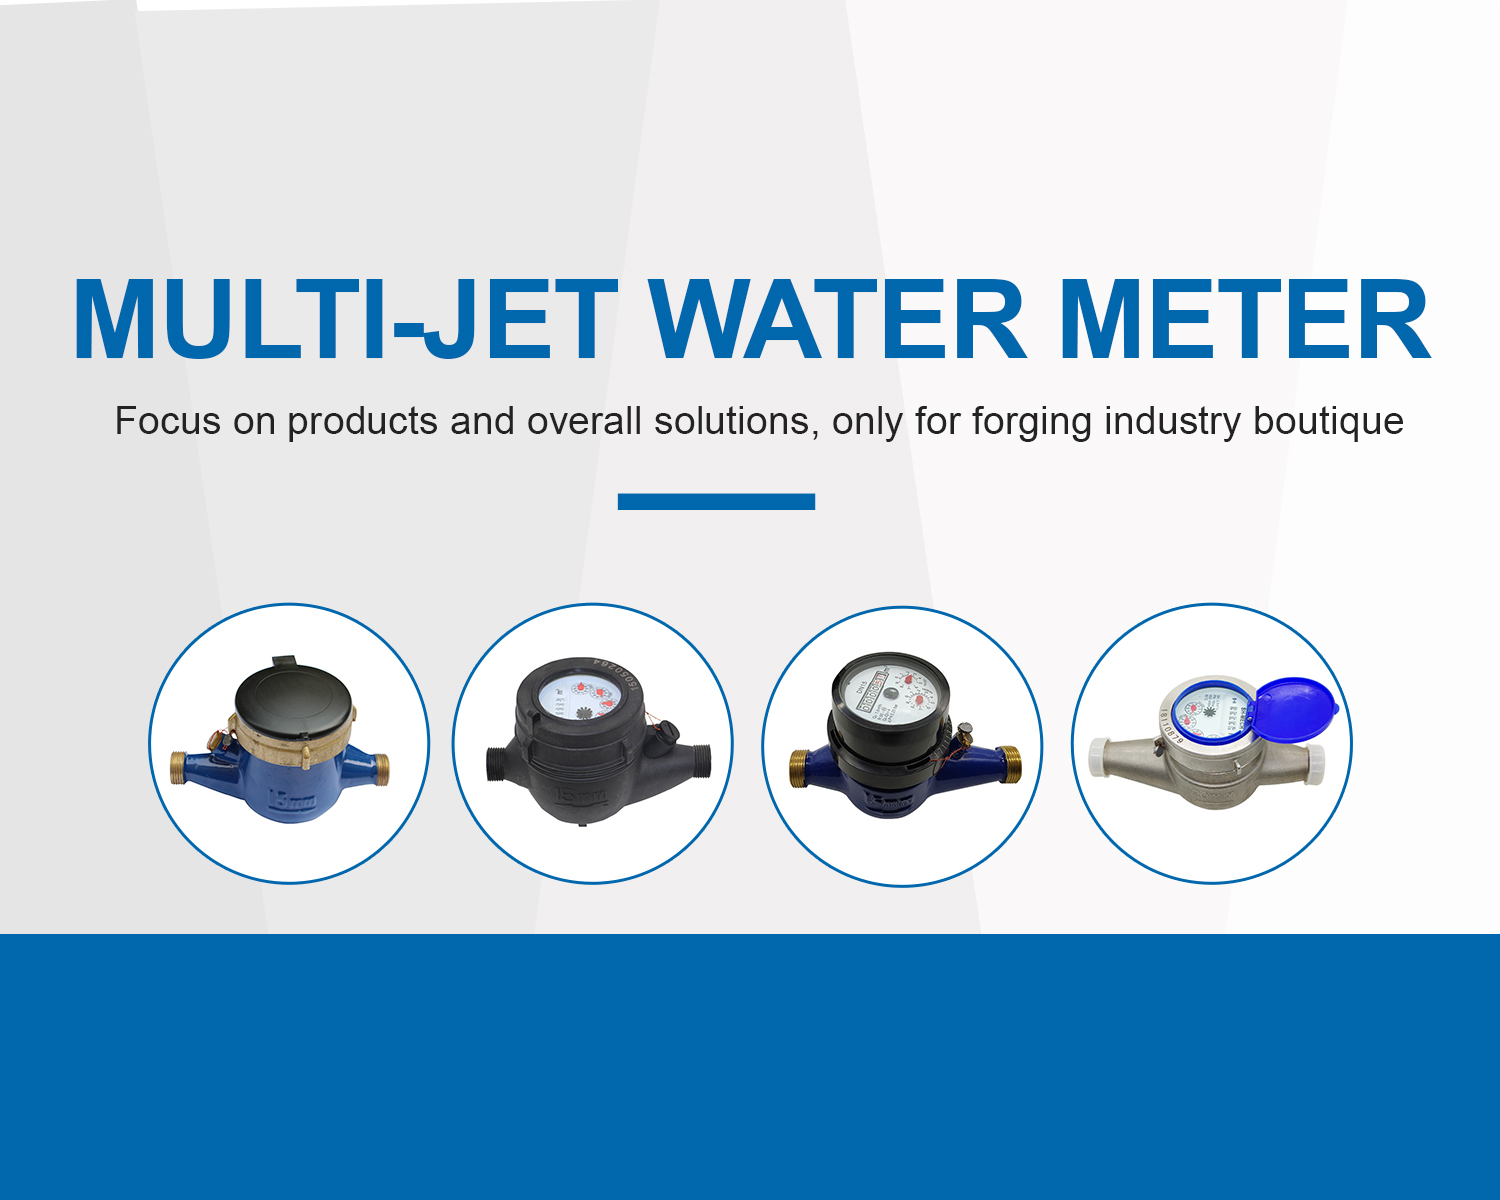 More Precision, Less Waste: The Advantages of Multi jet water meter